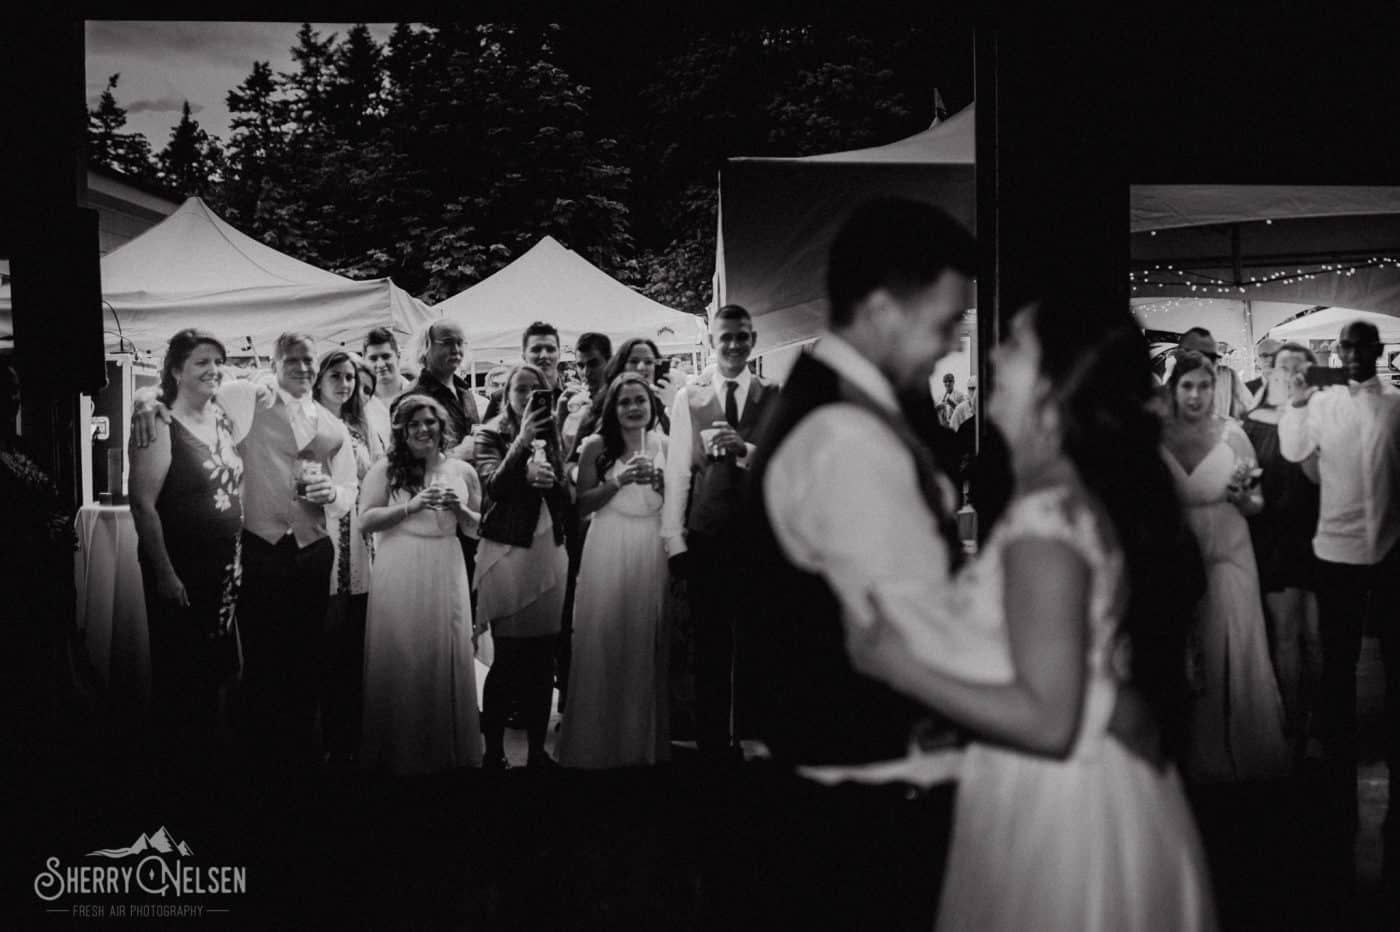 Bride and groom have their first dance as their friends and family look on in happiness at Shane & Shelbi's Sechelt wedding